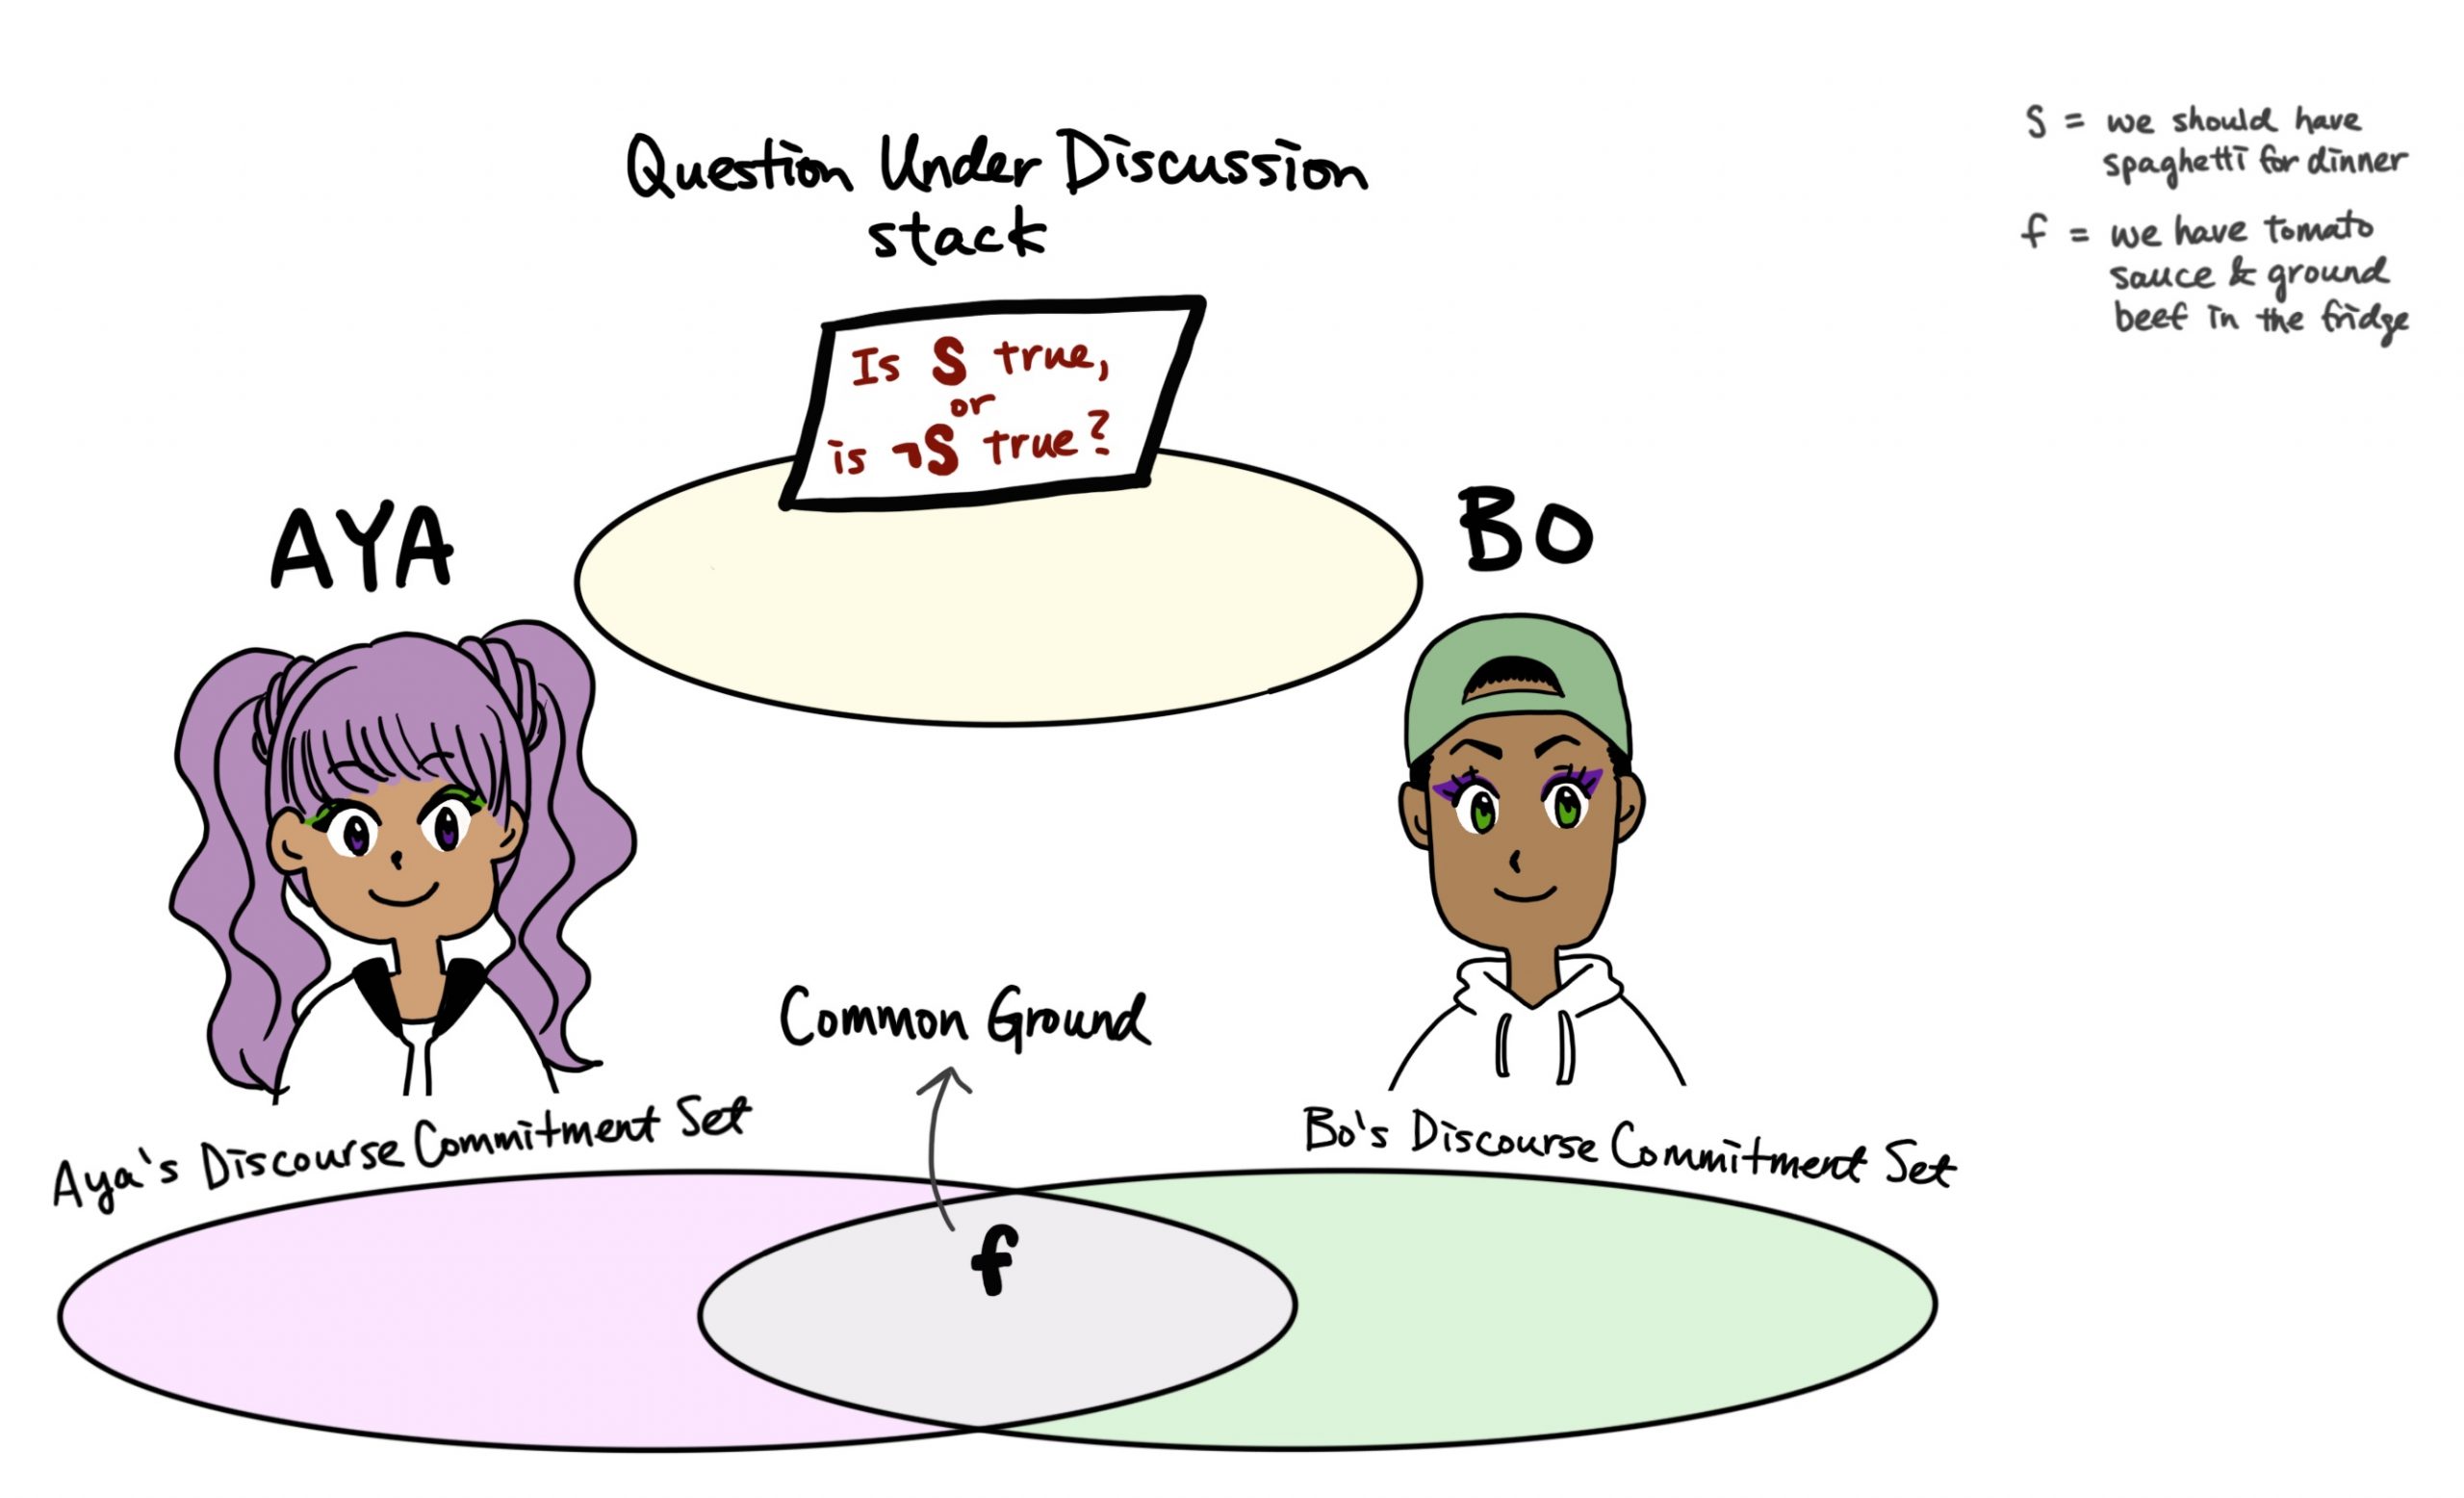  Illustration of the context with Aya and Bo as interlocutors. The illustration shows Aya's and Bo's Discourse Commitment Sets, the Common Ground, and the Question Under Discussion stack. The question "is f true?" gets removed from the QUD stack.